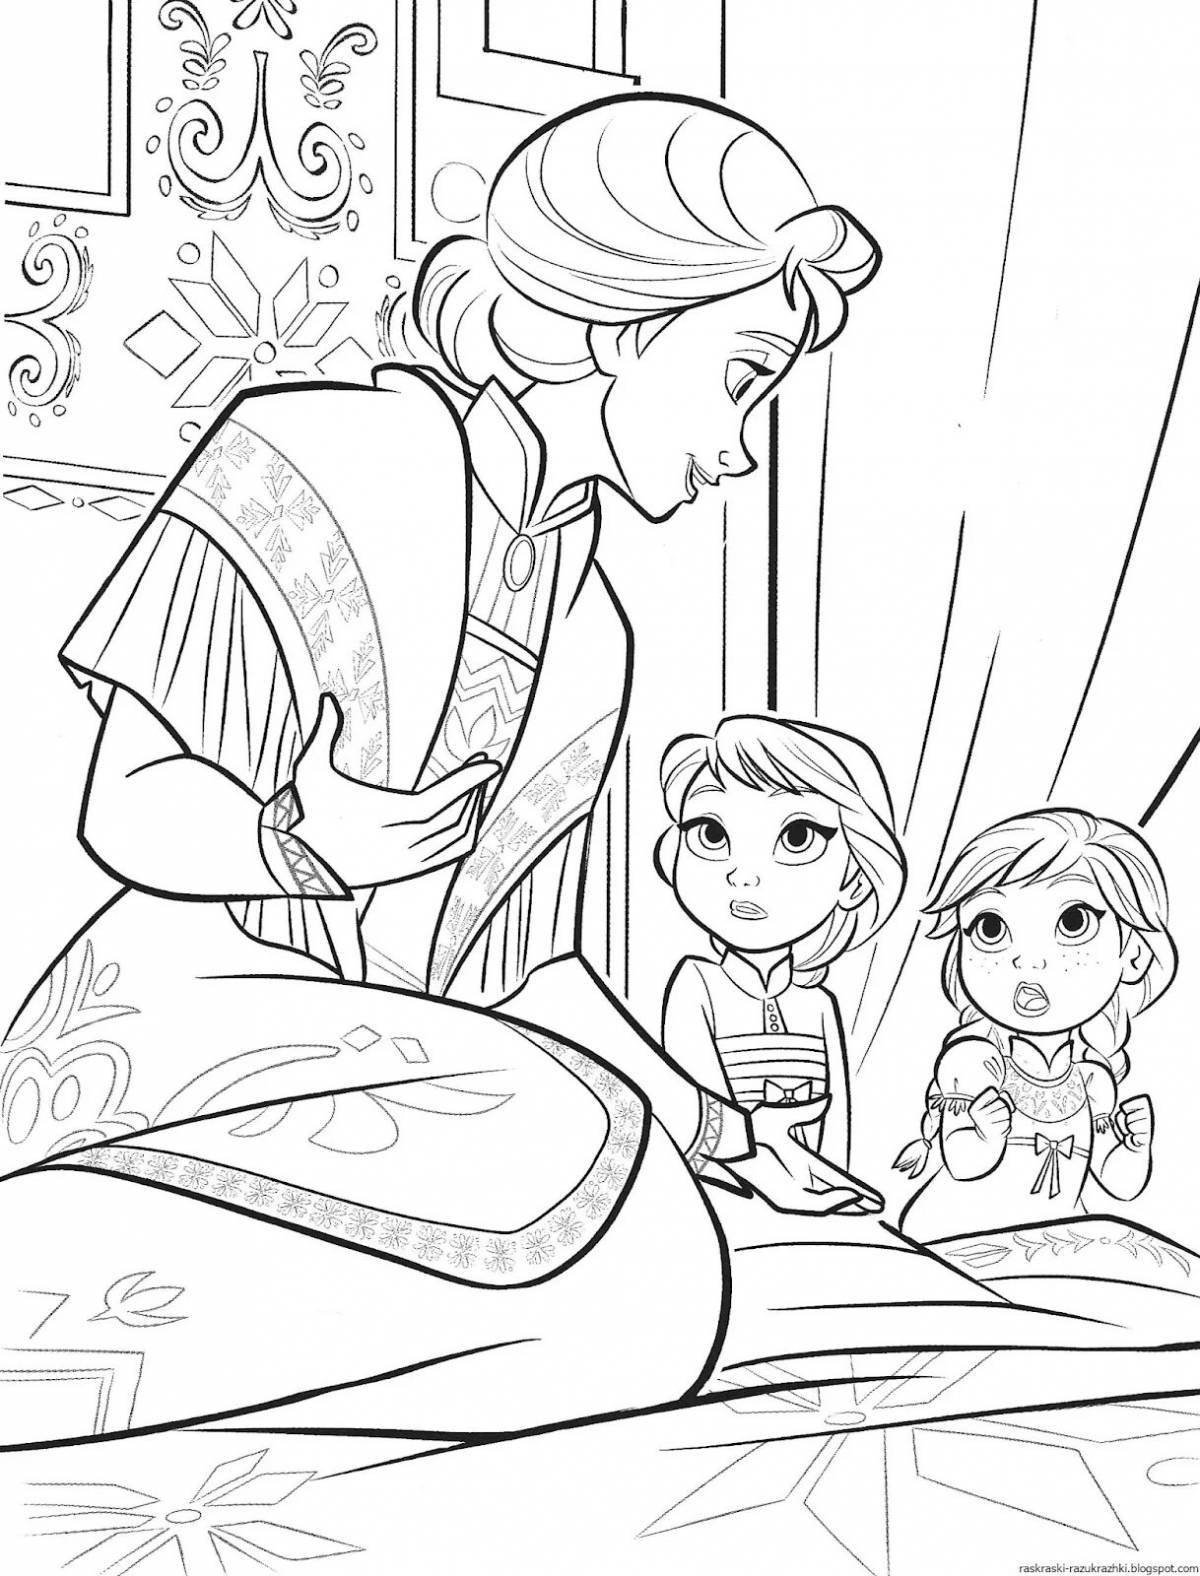 Exotic coloring book frozen 2 for girls